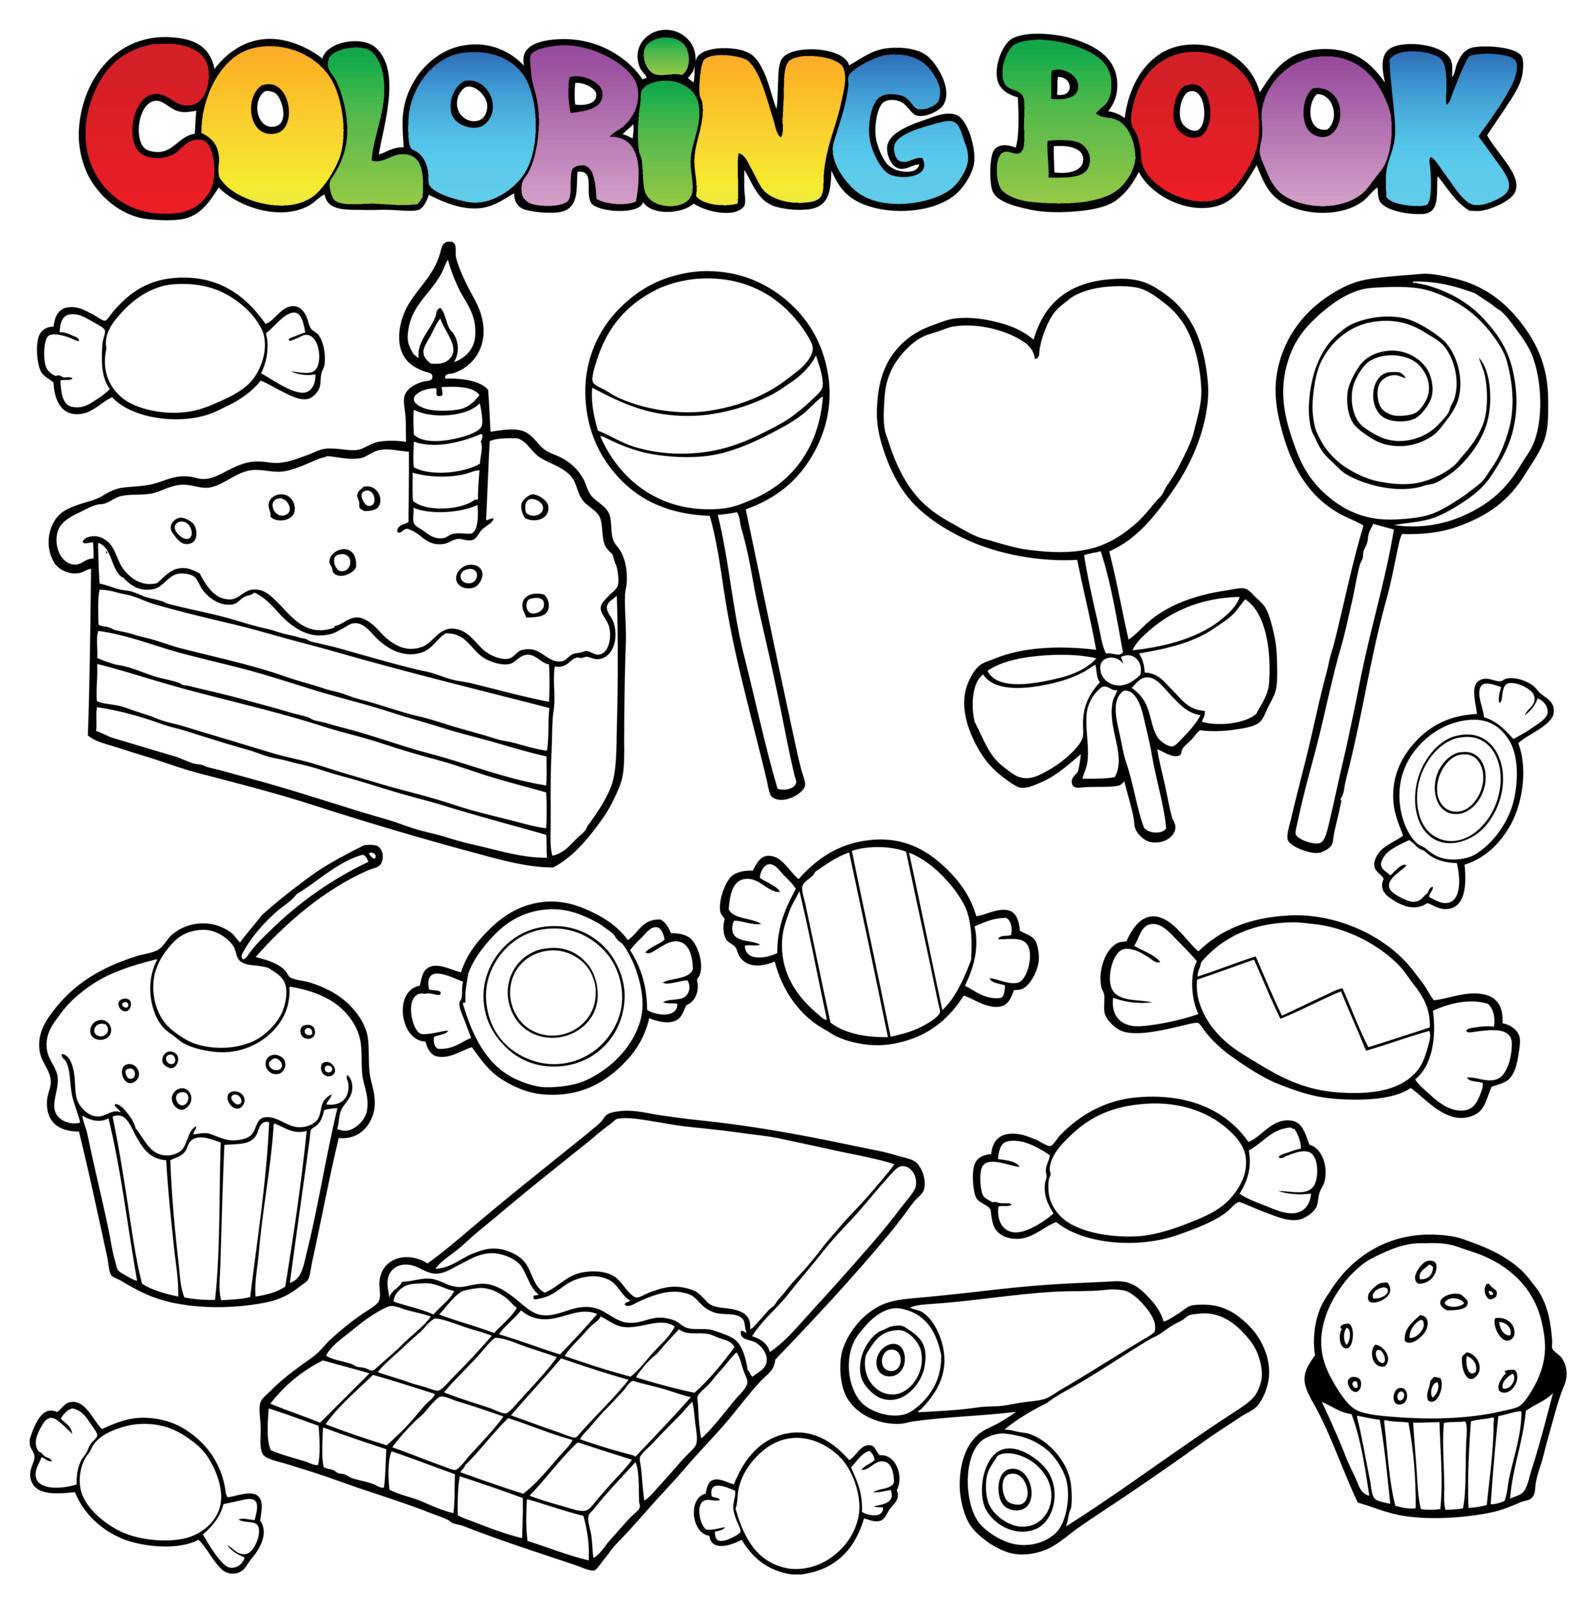 Coloring book candy and cakes - vector illustration.